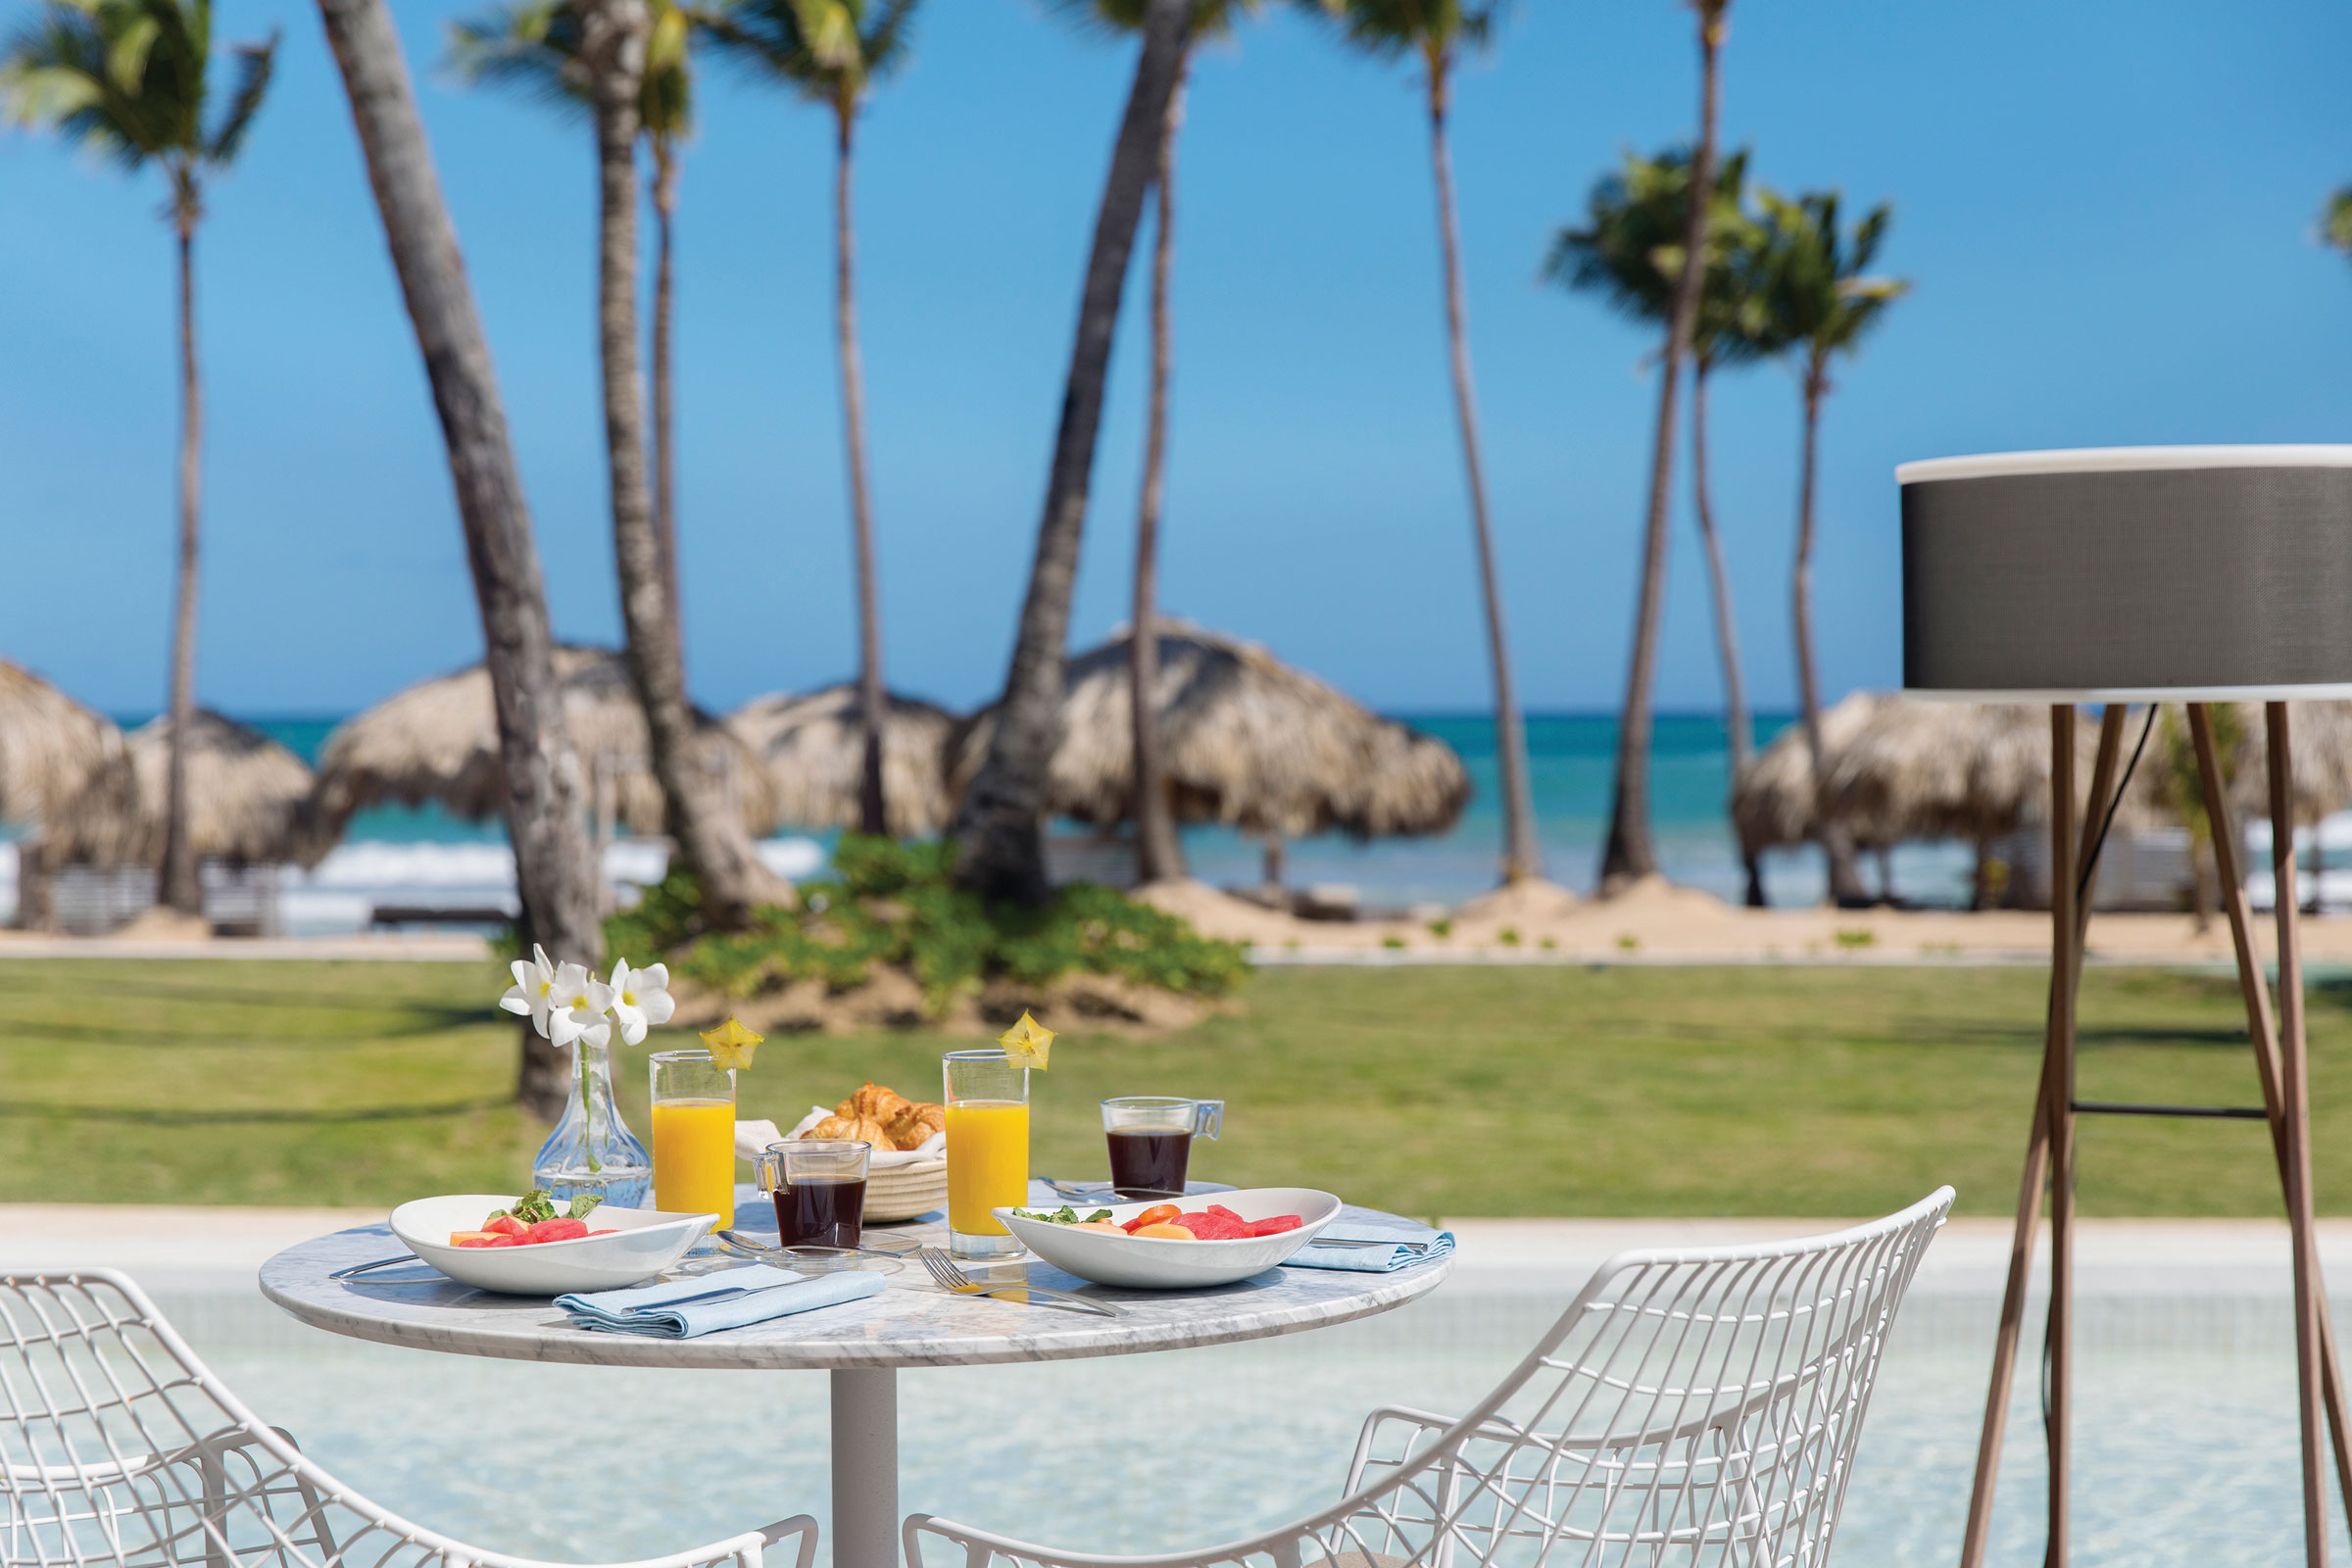 Magna Restaurant at Excellence Punta Cana offers you international cuisine in an oceanfront setting